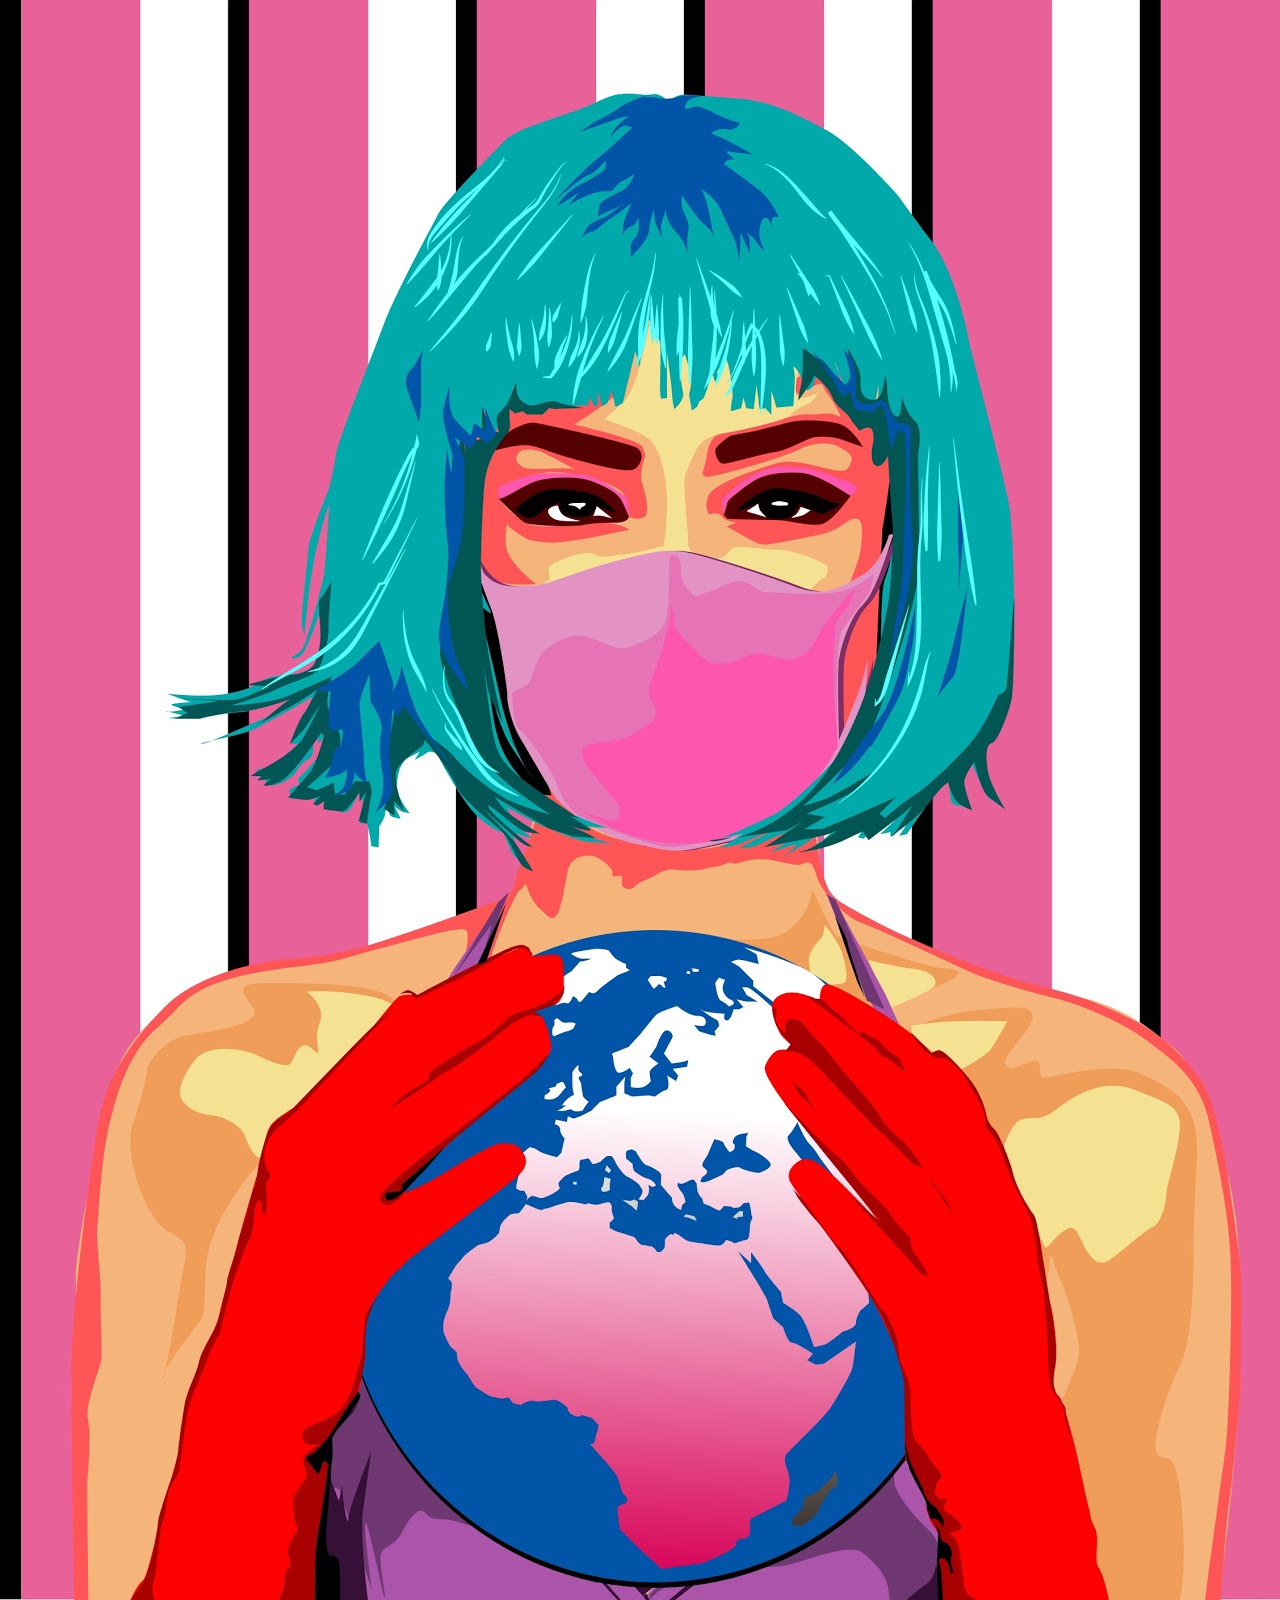 Raquel Galiano's submission to the United Nations Covid-19 Global Call Out to Creatives illustrates a mask and glove-donning female holding the globe in her hands.